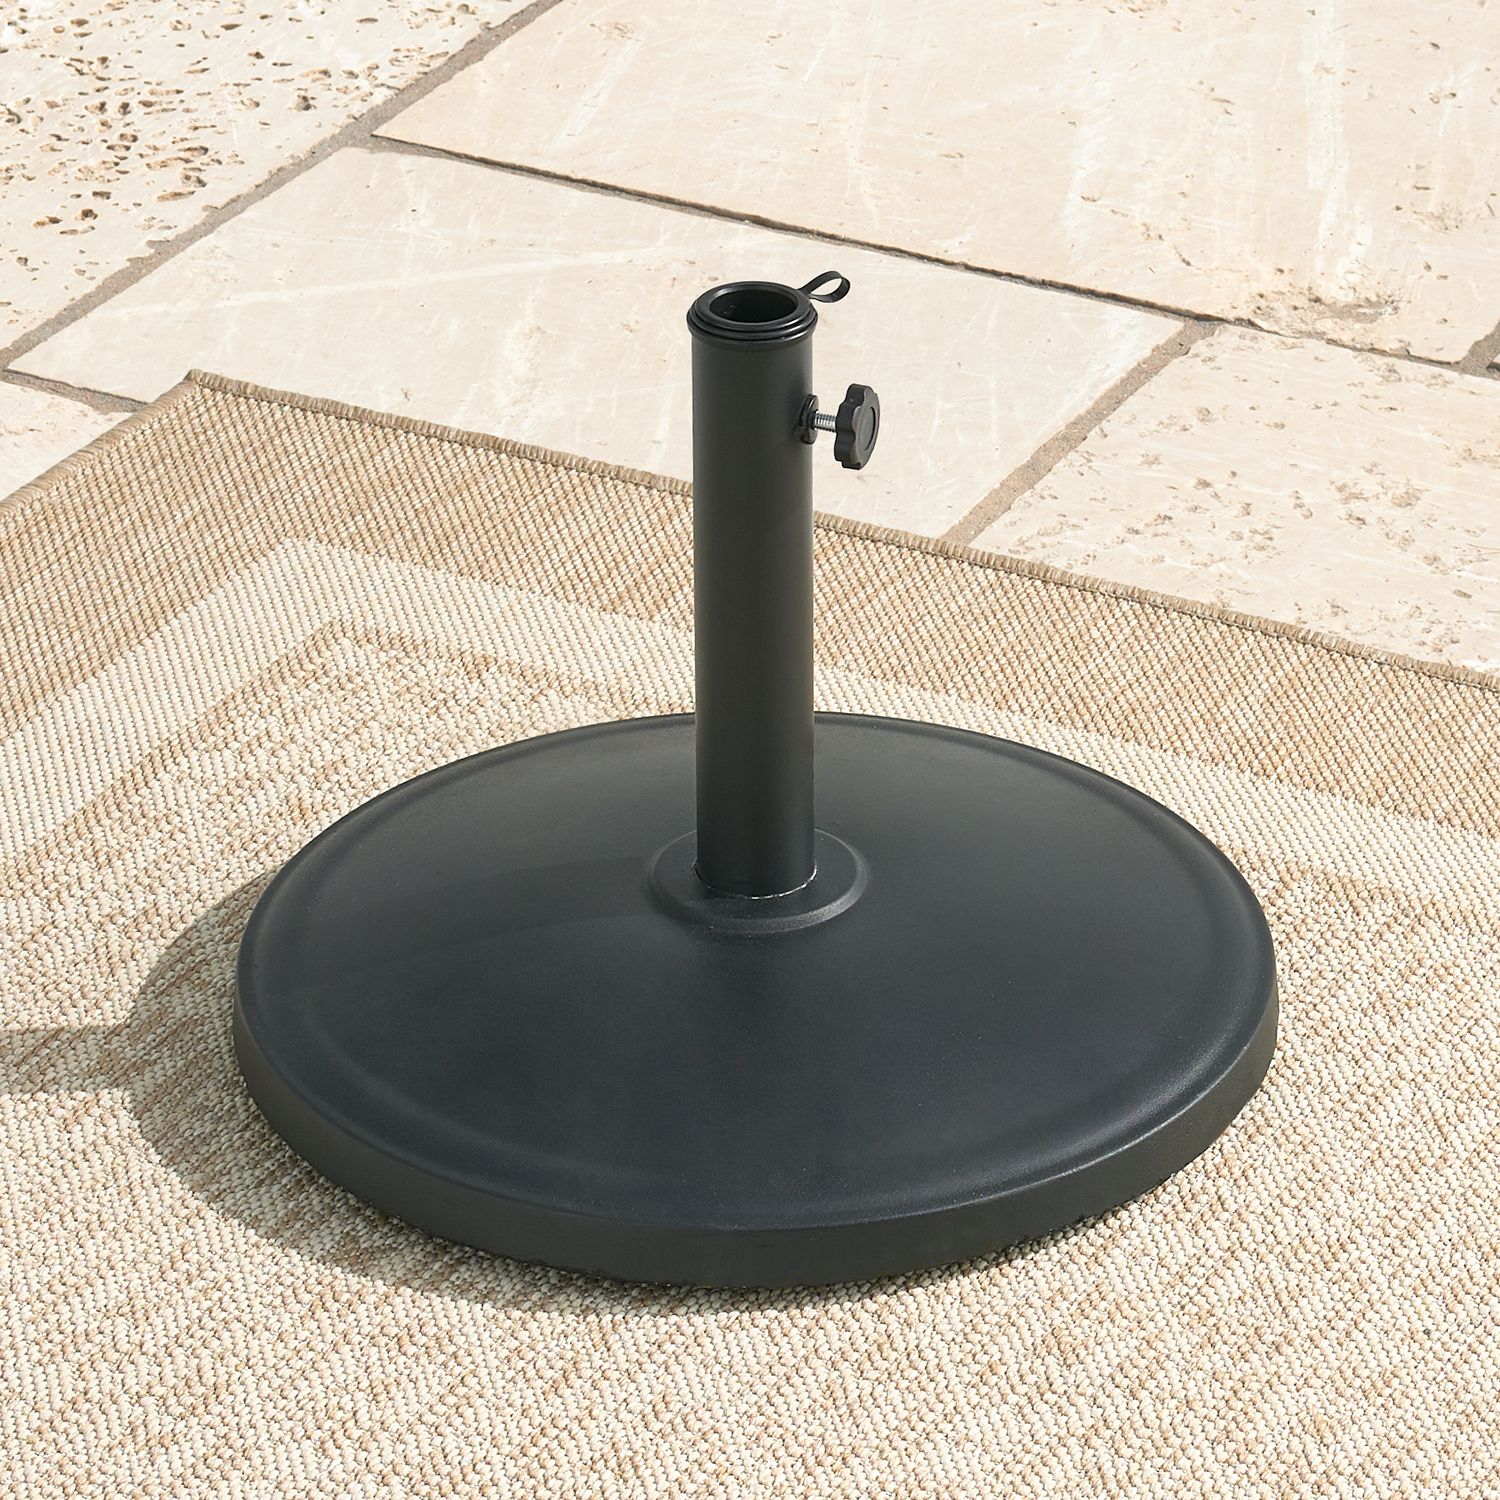 Outsunny 19 Round Patio Umbrella Base Weight Sand Bag Weather